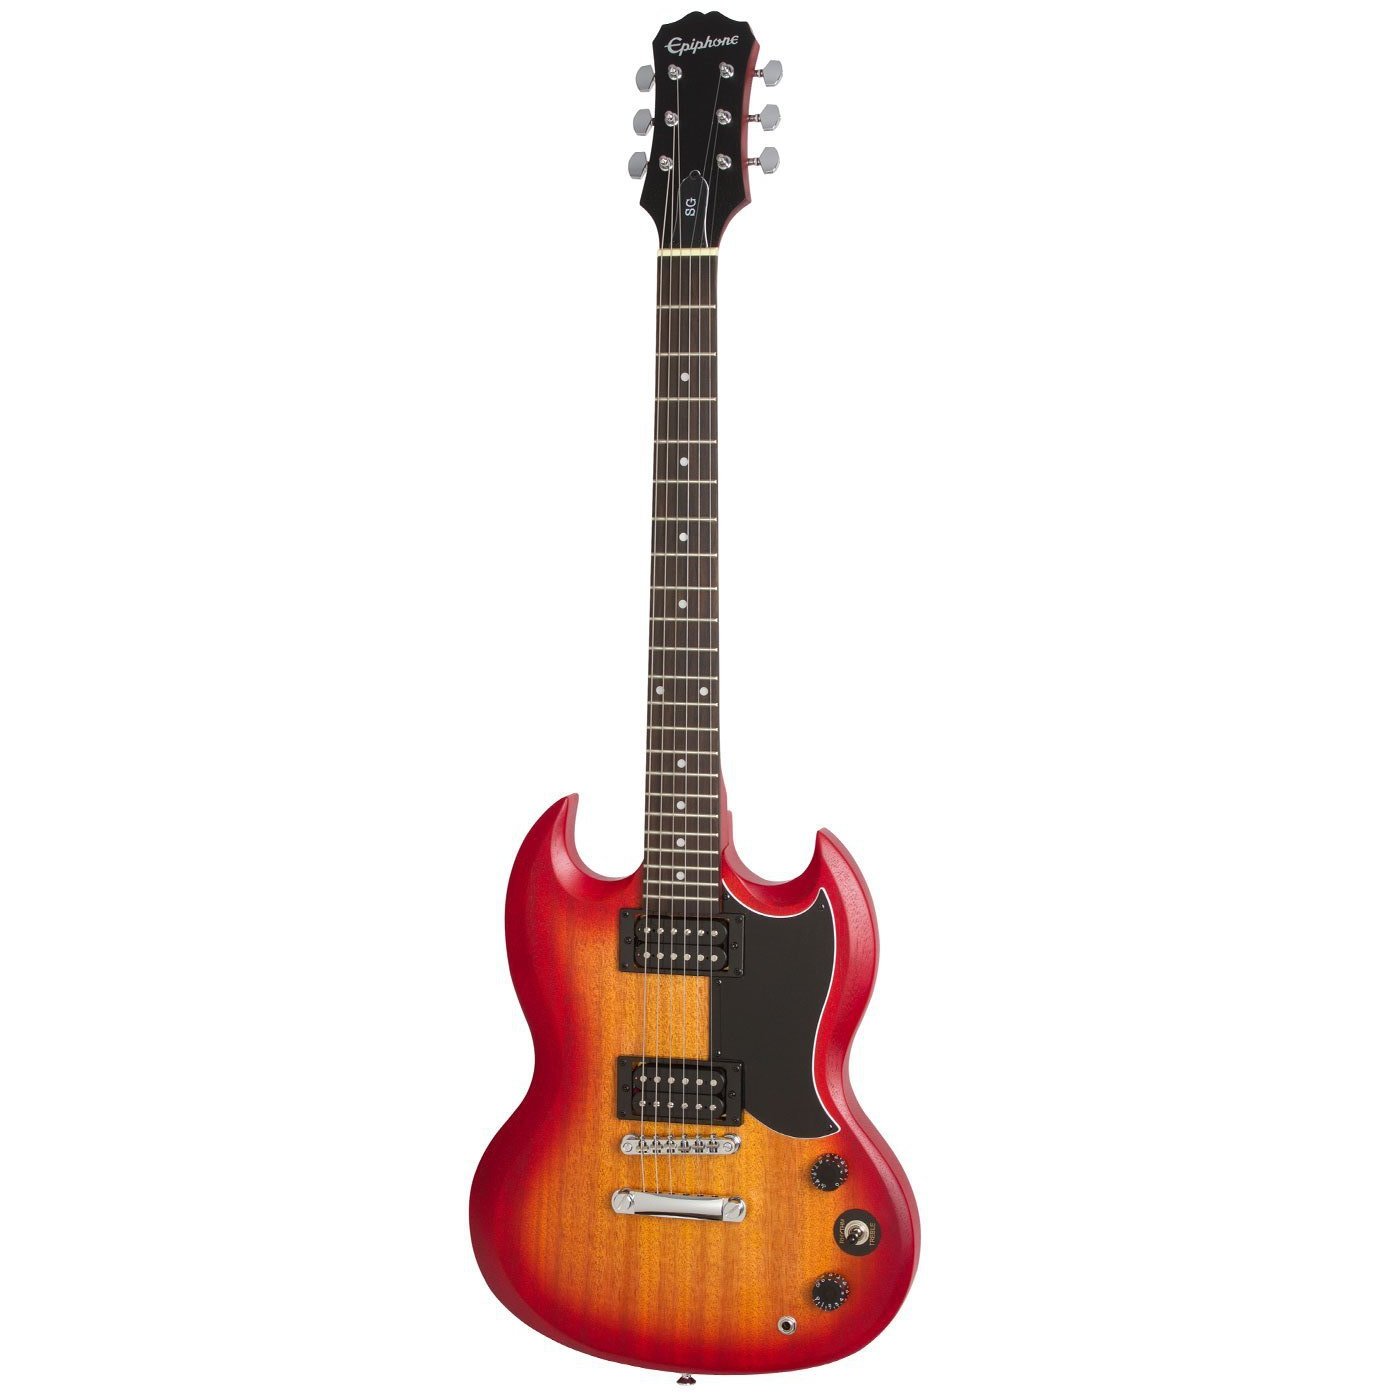 Epiphone SG Specialホビー・楽器・アート